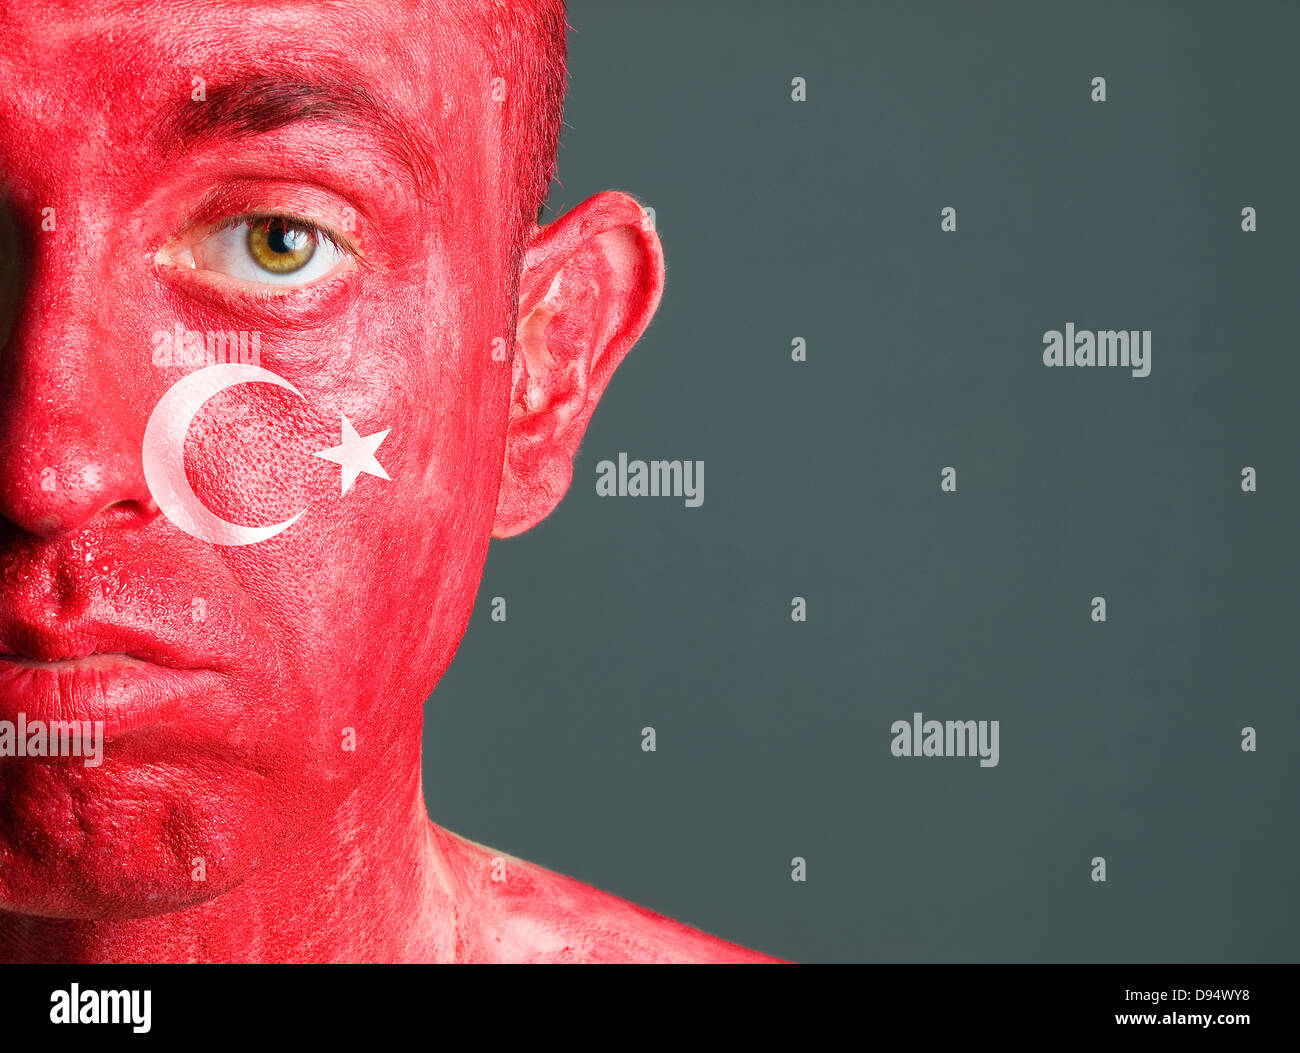 Face man turkish flag, isolated on dark background and looking at camera with sad expression. Stock Photo